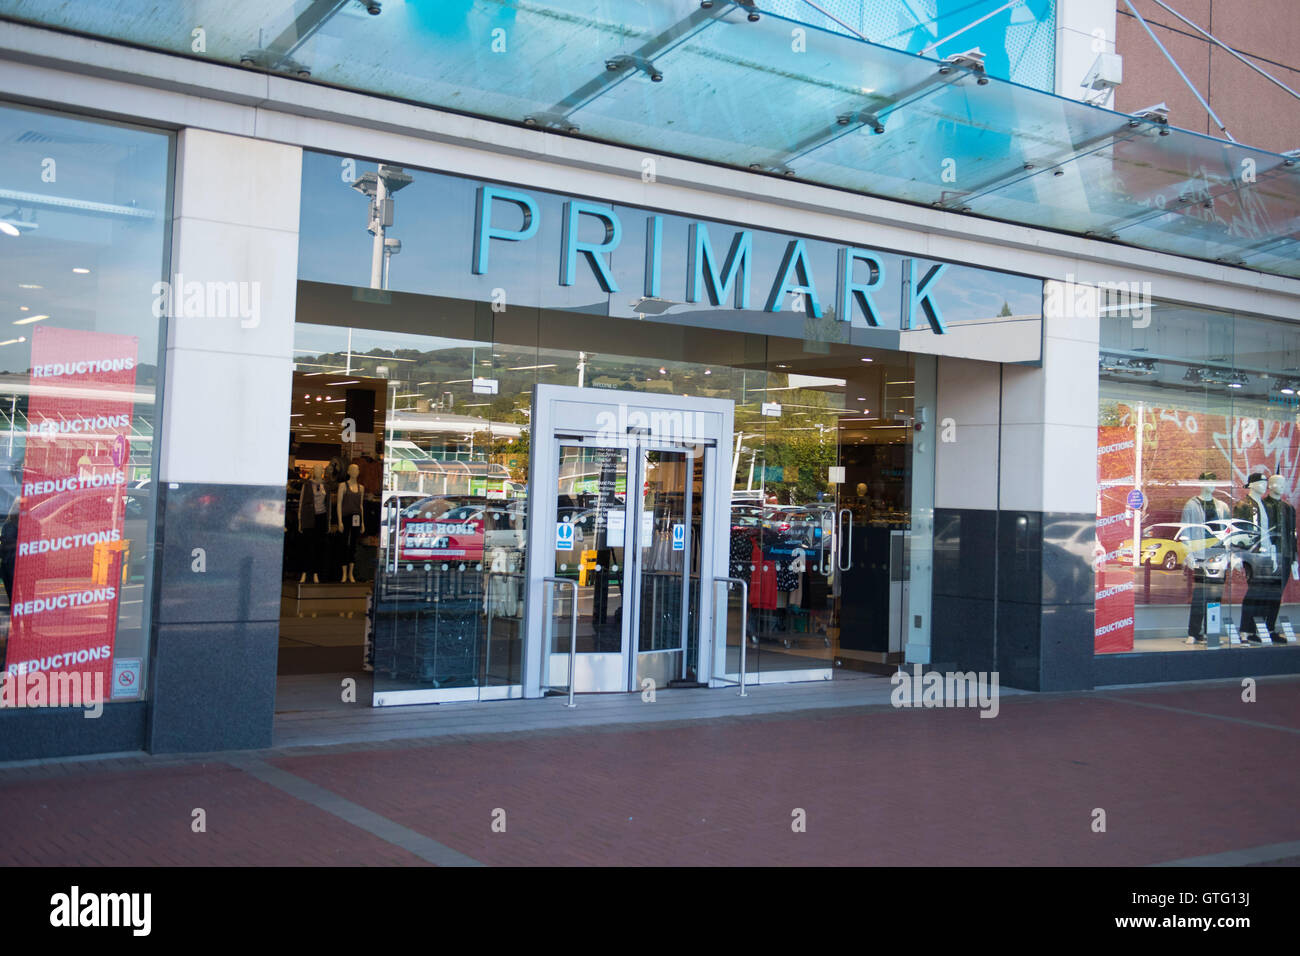 Primark budget clothes shop exterior store sign logo in Cwmbran, South Wales. Stock Photo